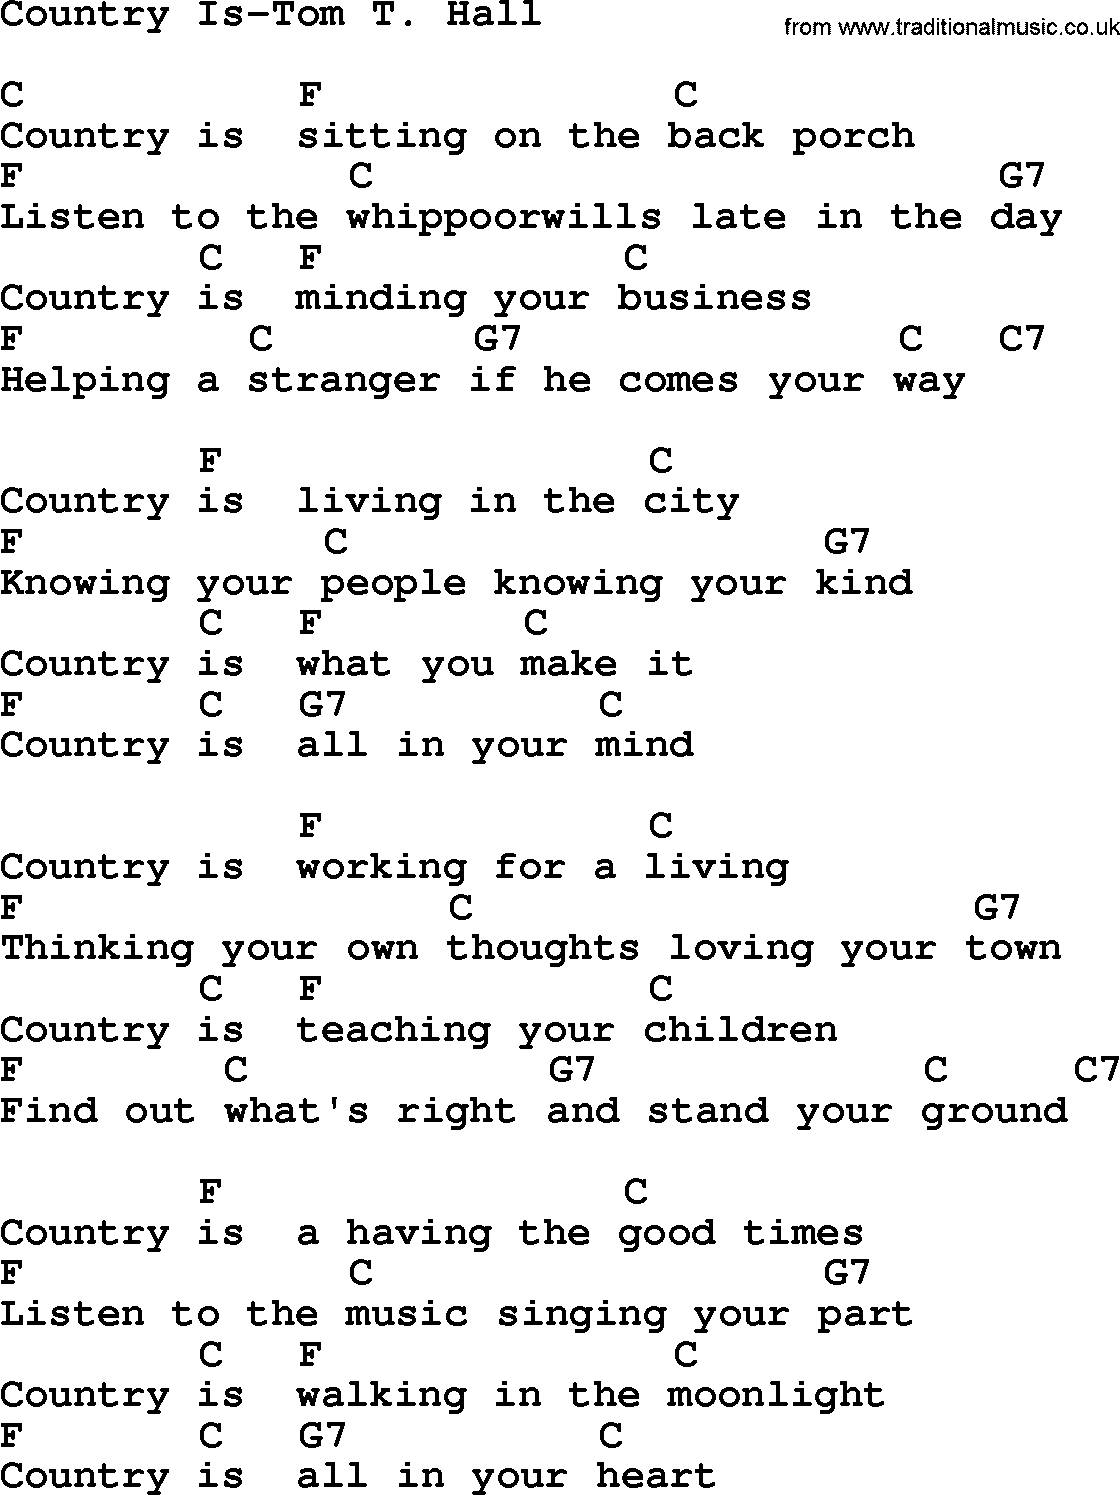 Country music song: Country Is-Tom T Hall lyrics and chords